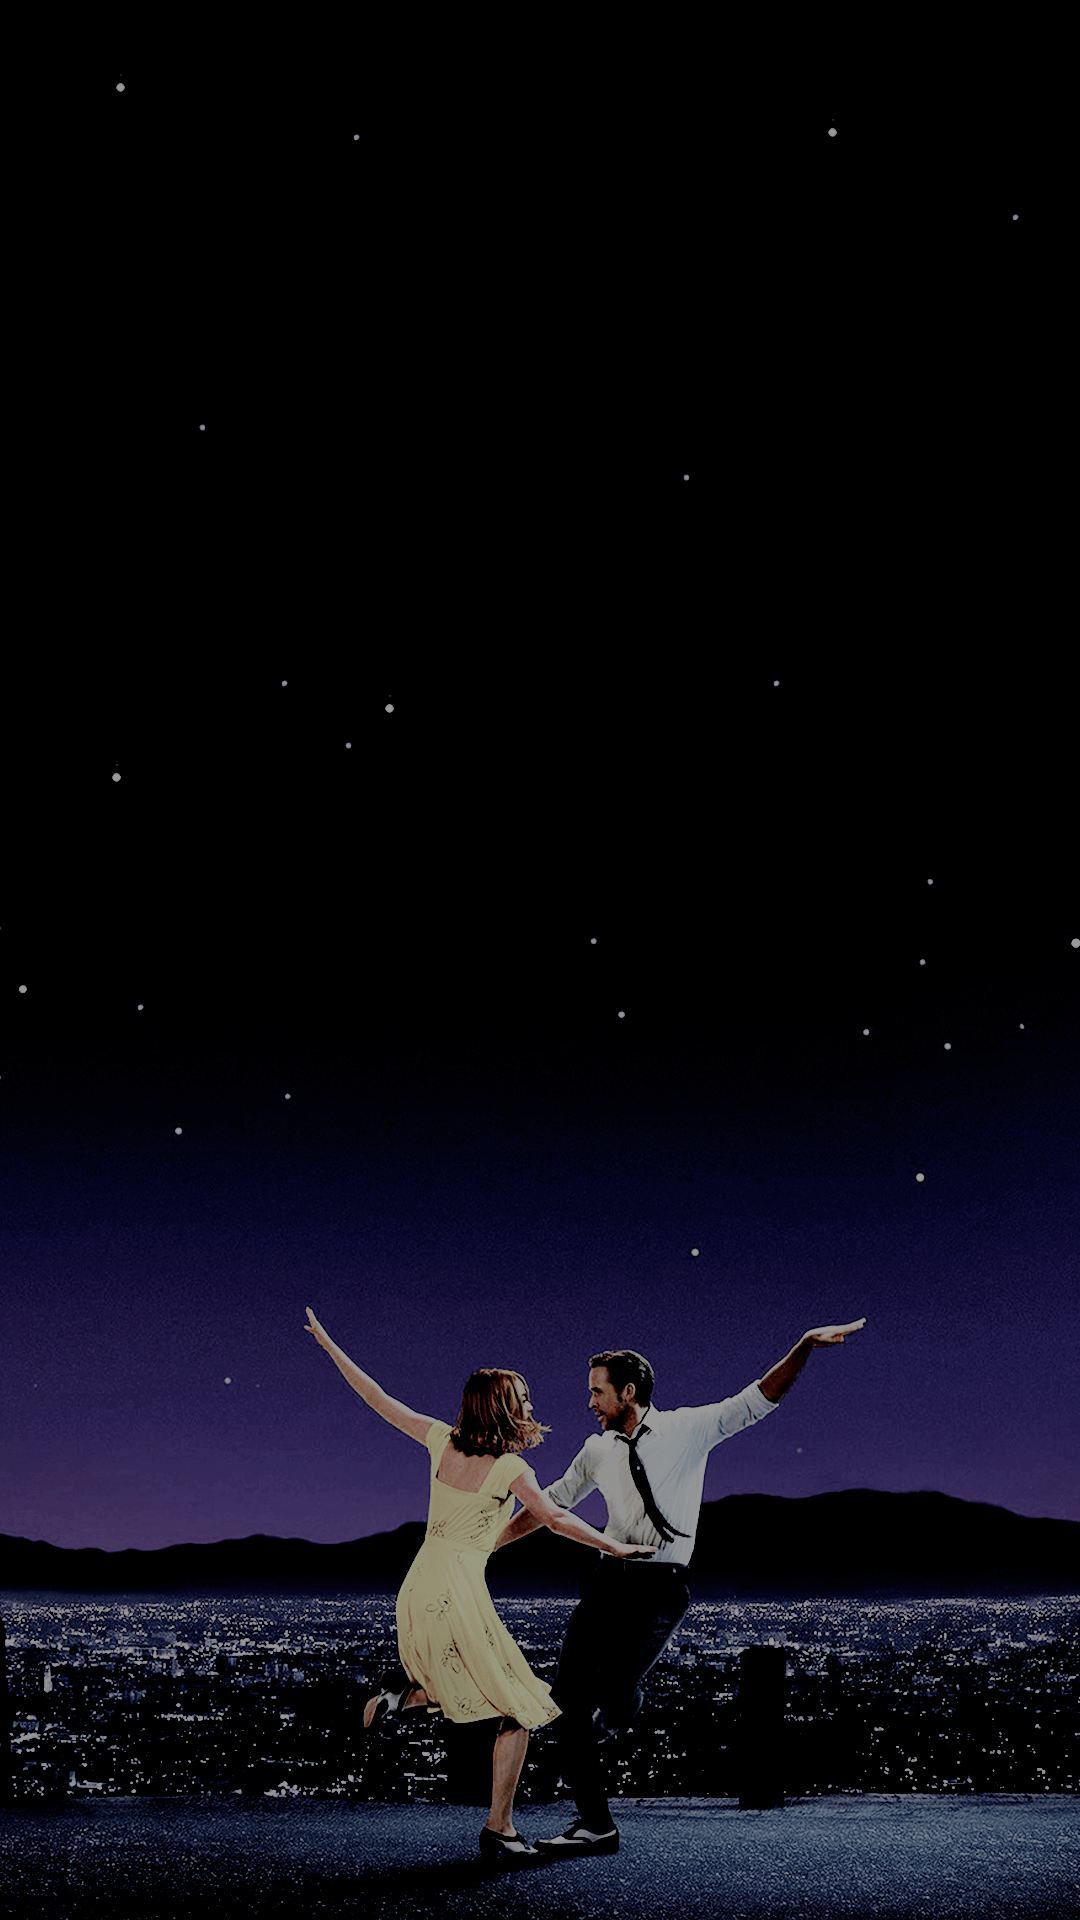 La La Land Wallpaper Requested Please Like Or Reblog If Saving Using DO NOT Repost Or Claim As Your Own. IPhone 7 Wallpaper, Wallpaper Picture, La La Land